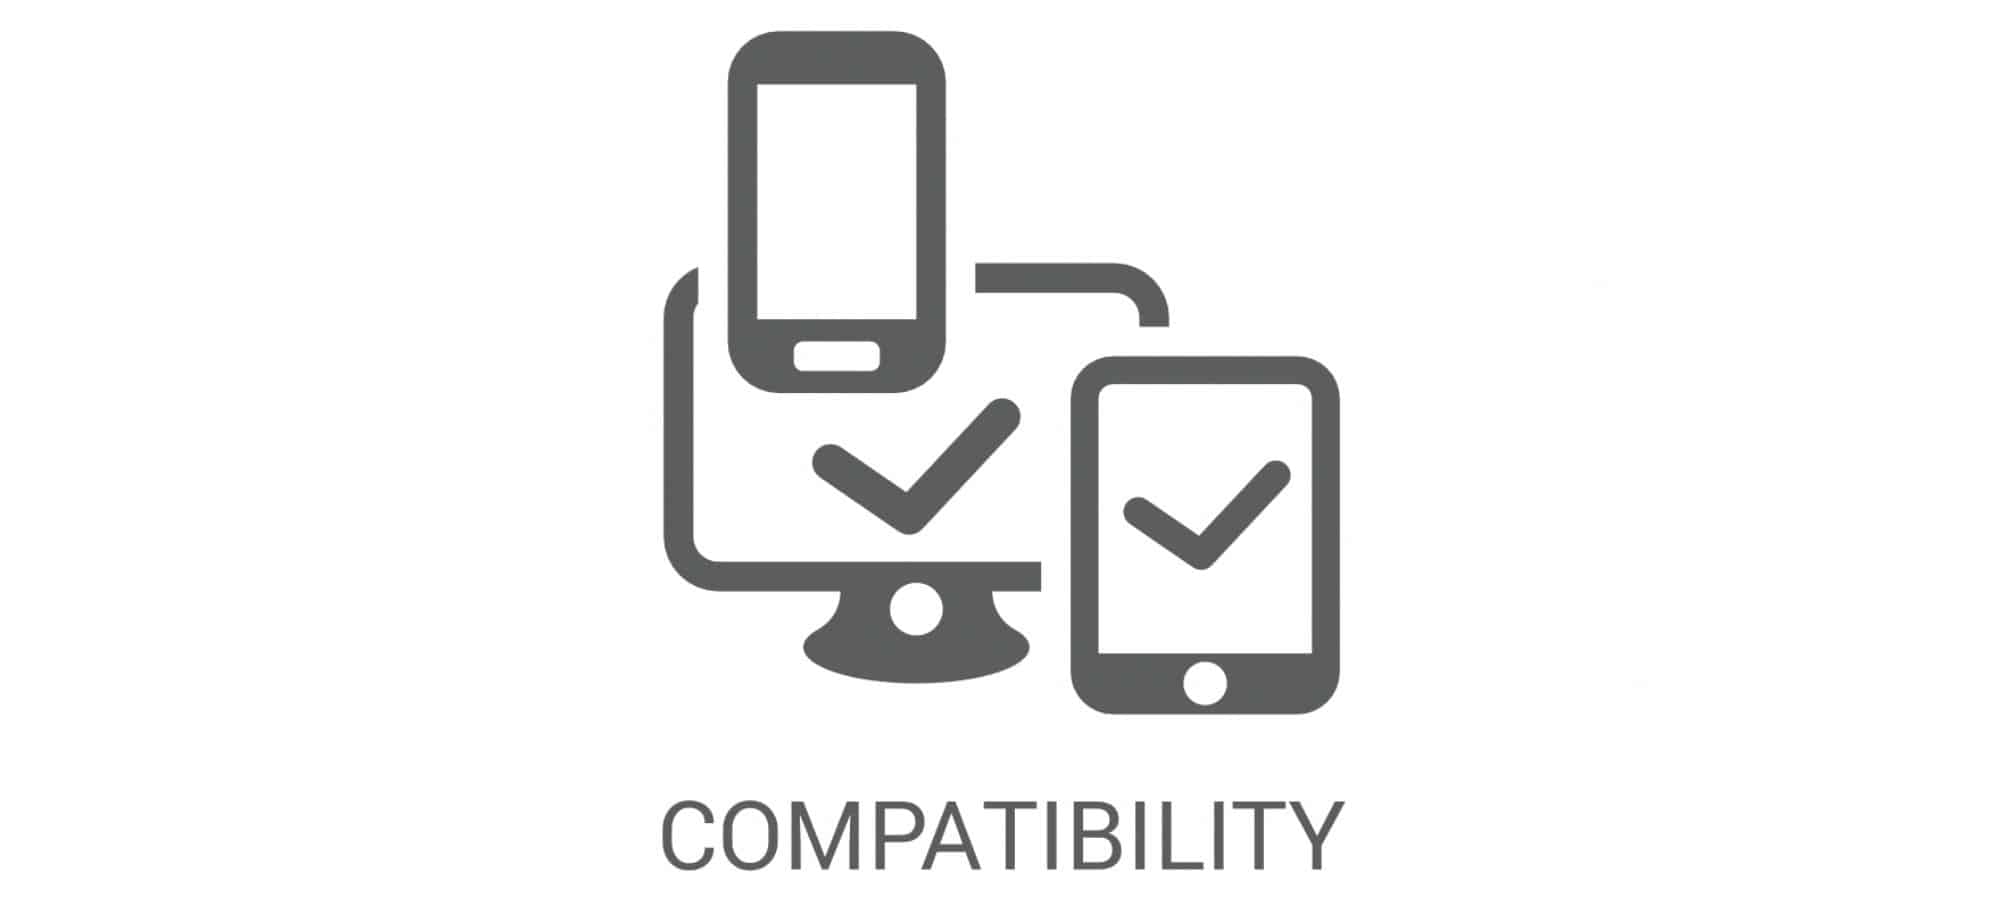 Check for Compatibility between Devices